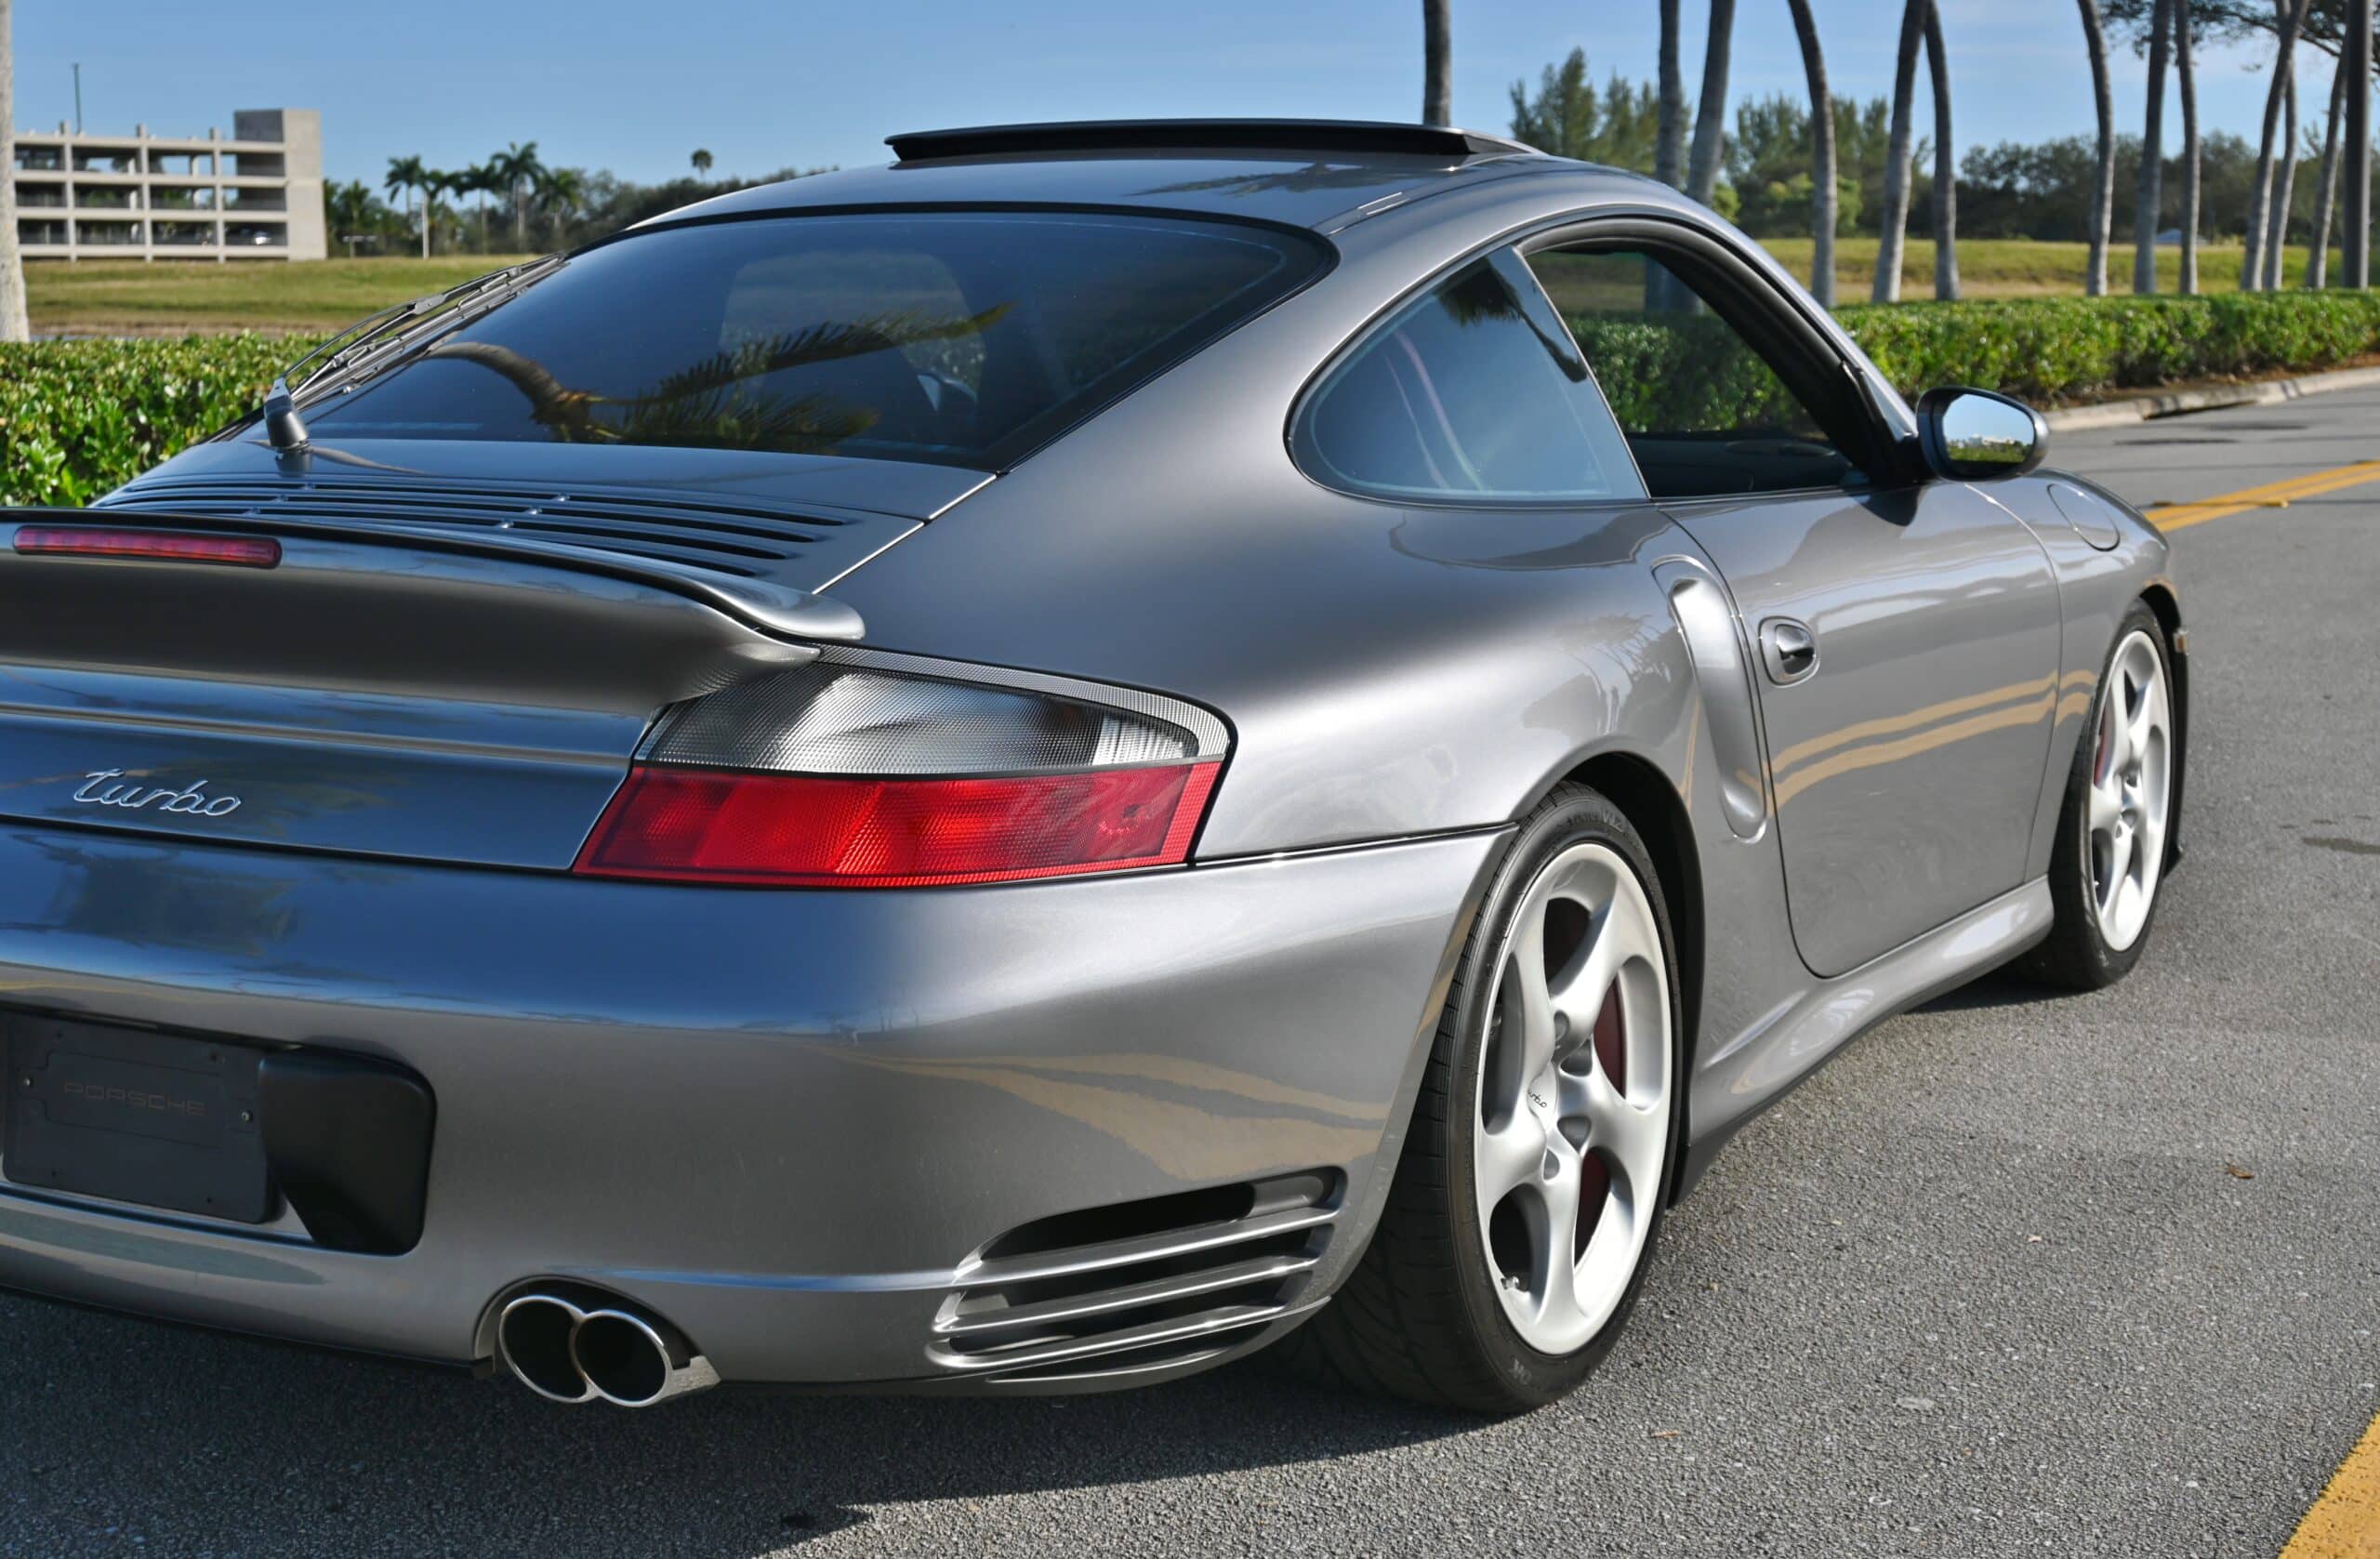 2001 Porsche 911 996 Turbo ONLY 11K MILES -Manual-Fully Loaded Factory Carbon-Sport Seats- Crazy Documented